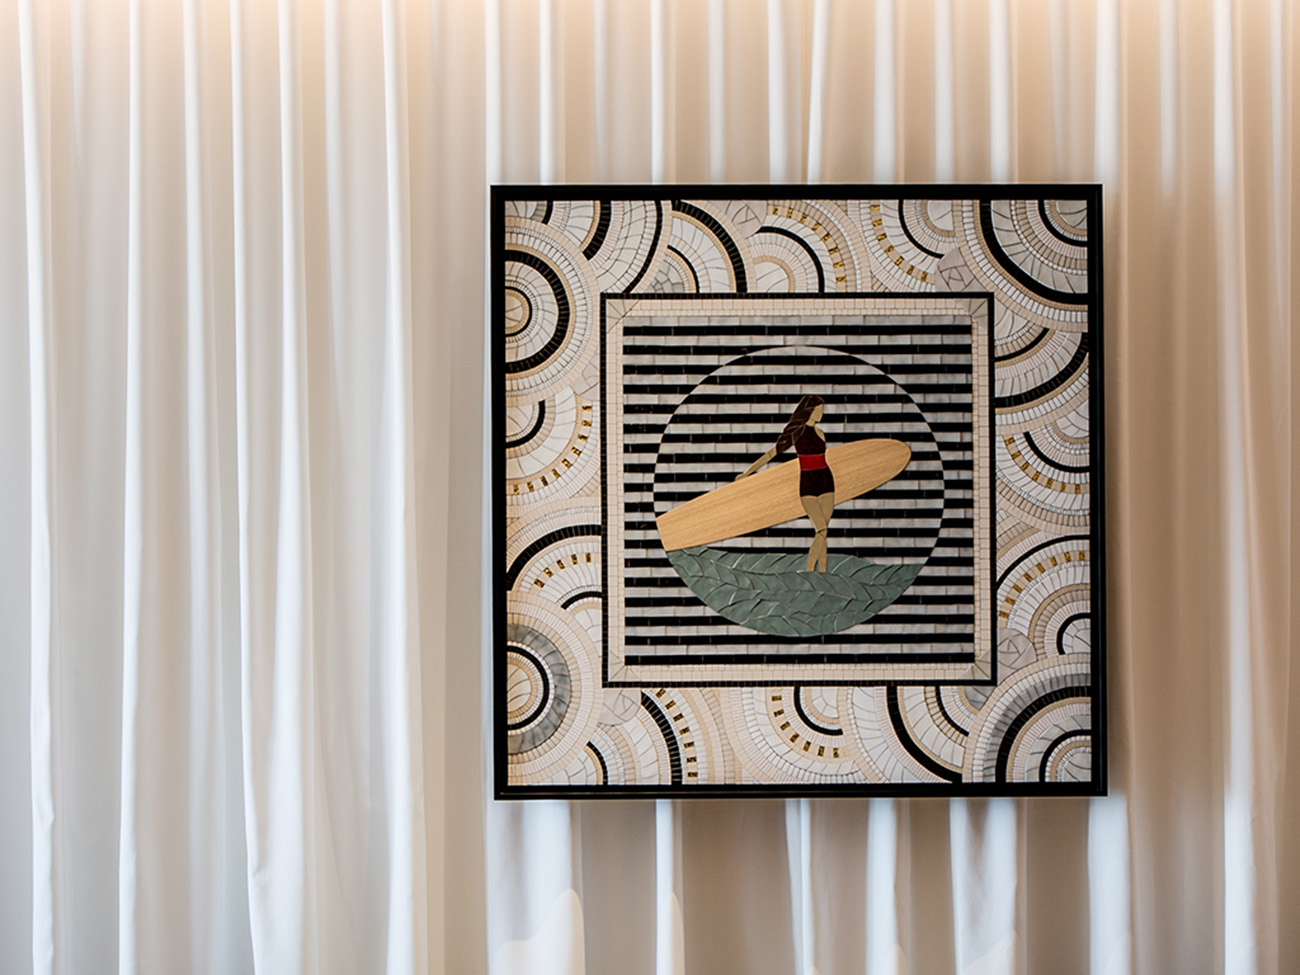 work of art in the thalasso of the hotel hélianthal Saint-Jean-De-Luz designed by the studio of interior architecture jean-philippe nuel, dream thalasso, luxury swimming pool, purified design, French architect, sober and chic decoration